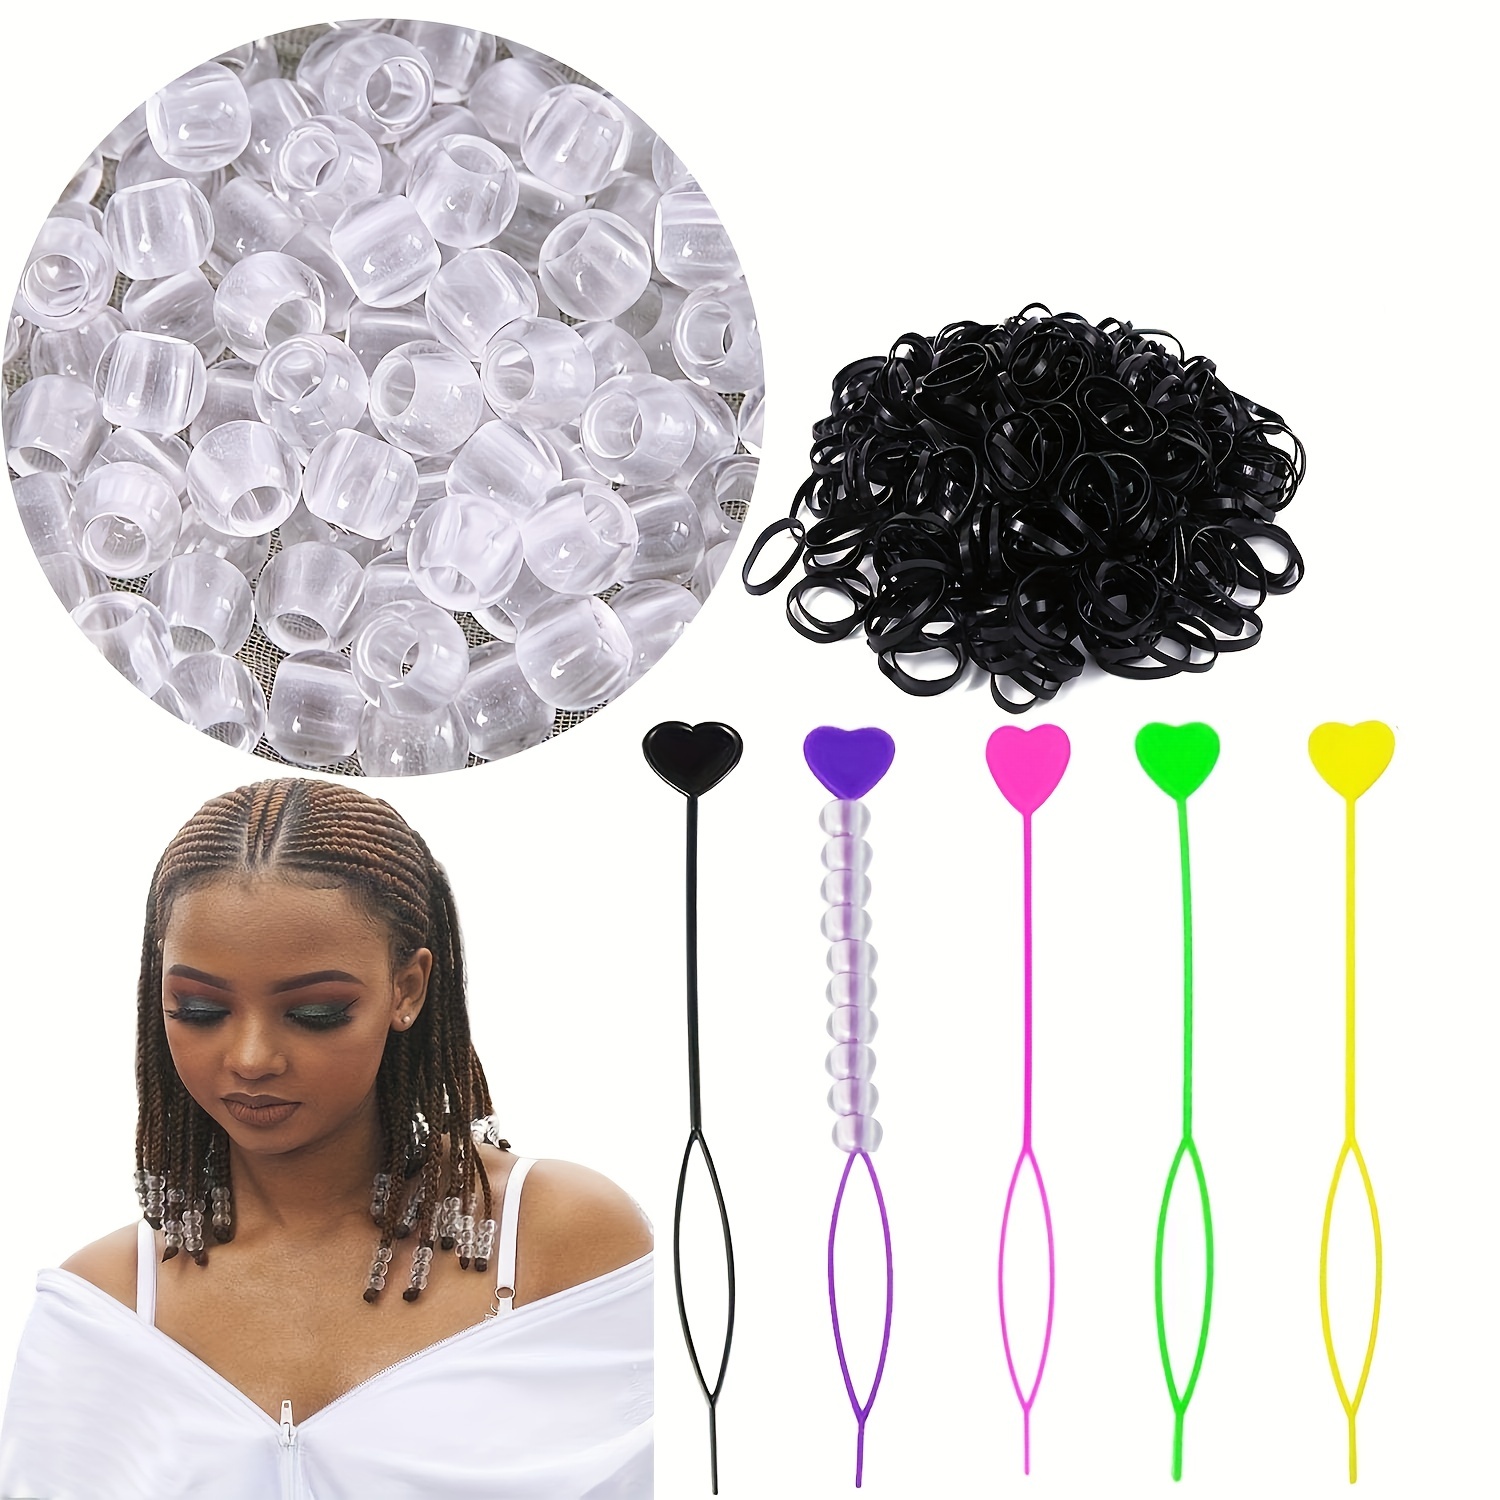 TIHOOD 16PCS Quick Beader for Loading Beads/Automatic Hair Beader and  Styling Kit/Plastic Magic Topsy Tail Hair Braid Ponytail Styling Maker  (Random